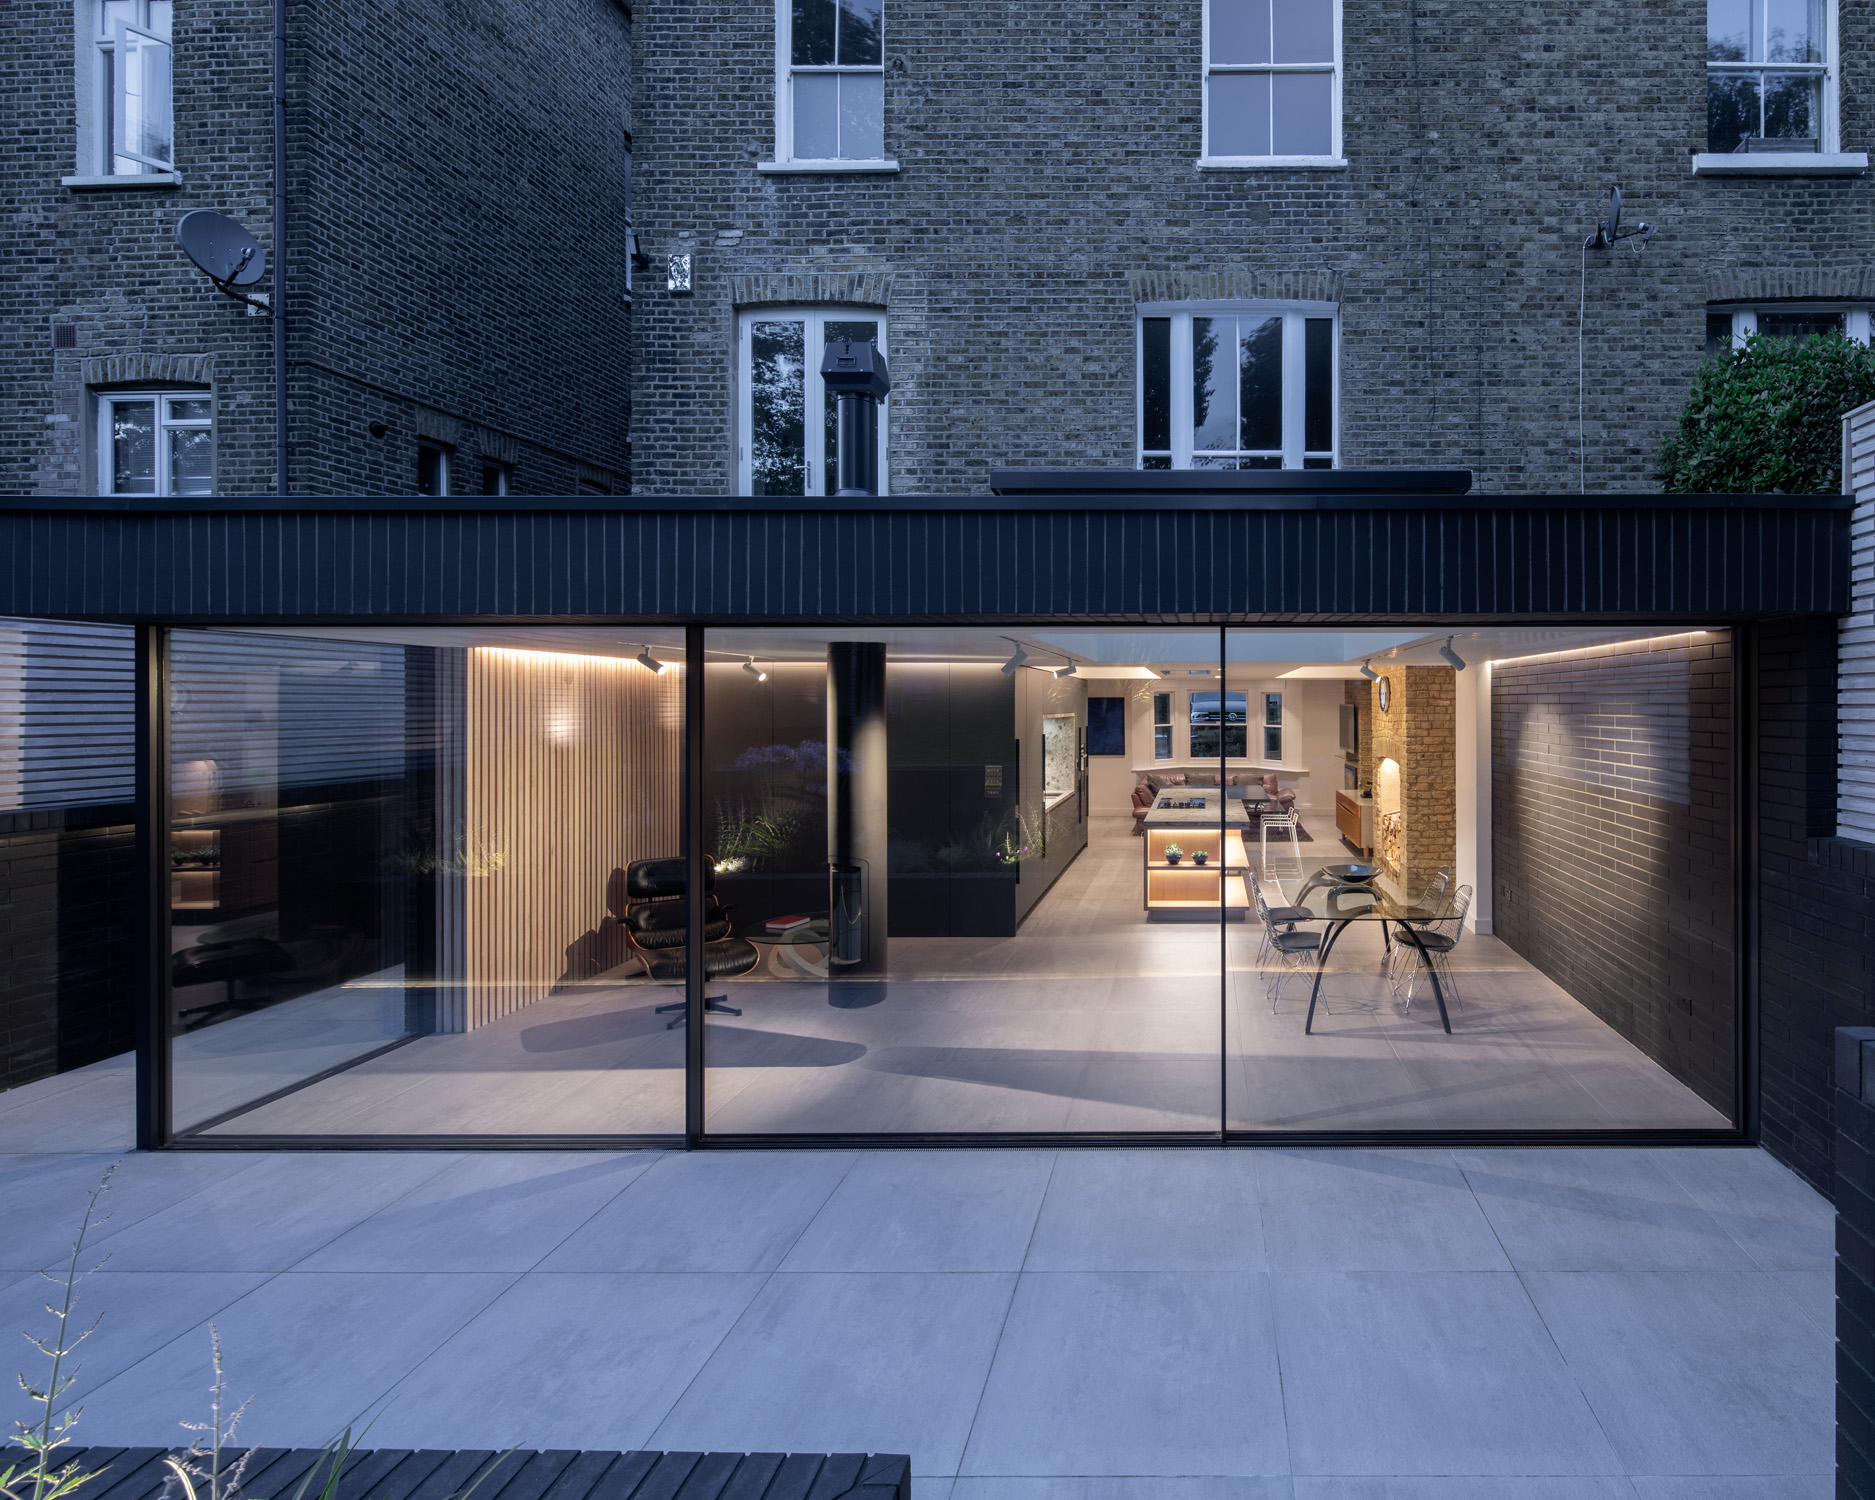 Garden by Proctor &amp; Shaw - minimalist contemporary architecture and interior design in London